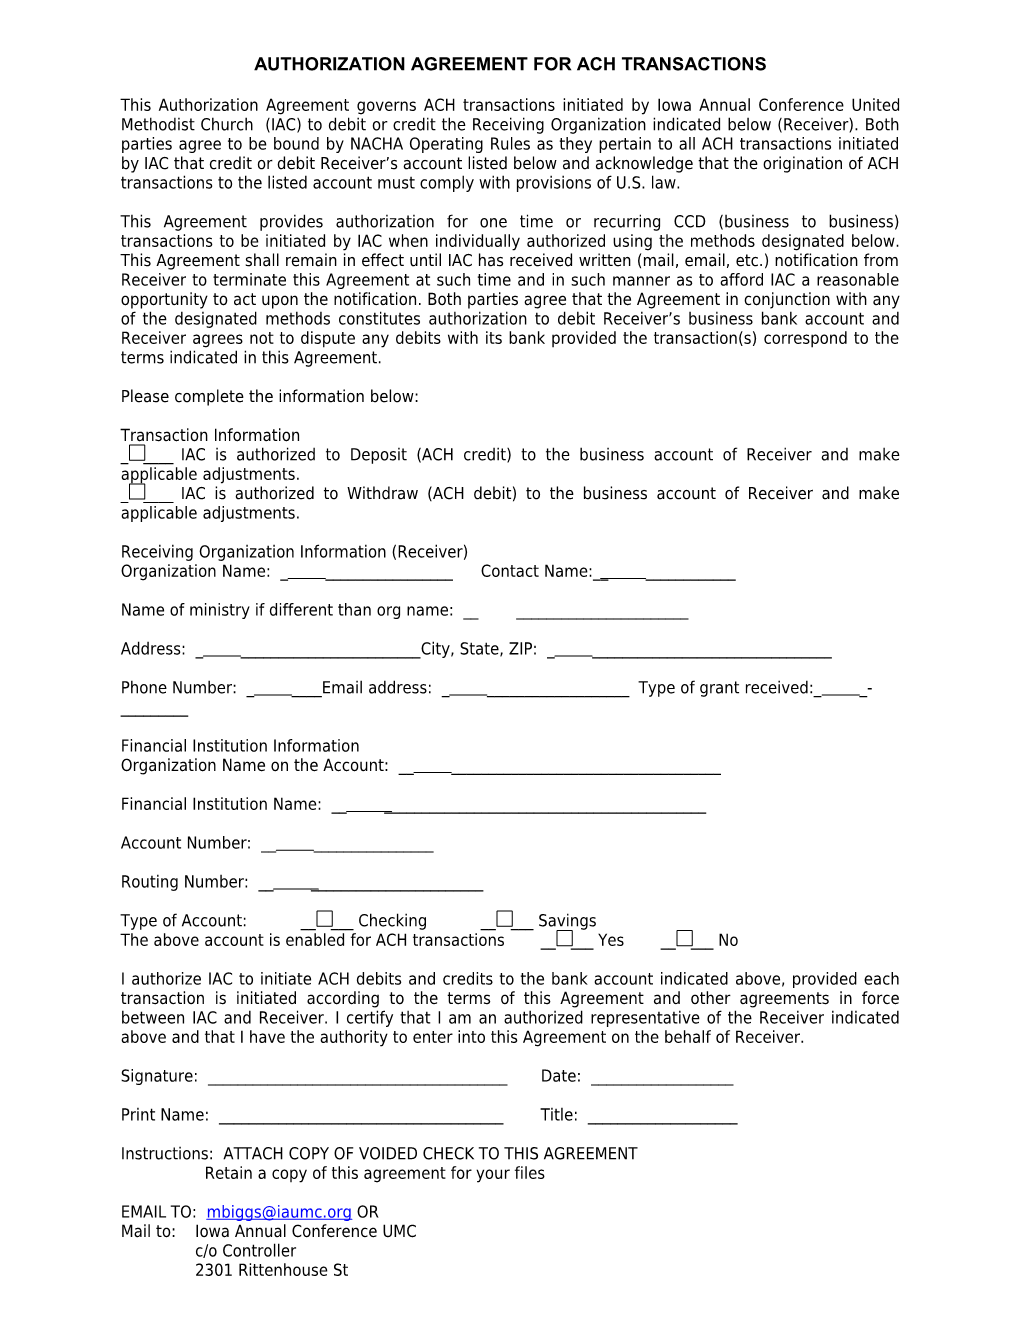 Authorization Agreement for Ach Transactions